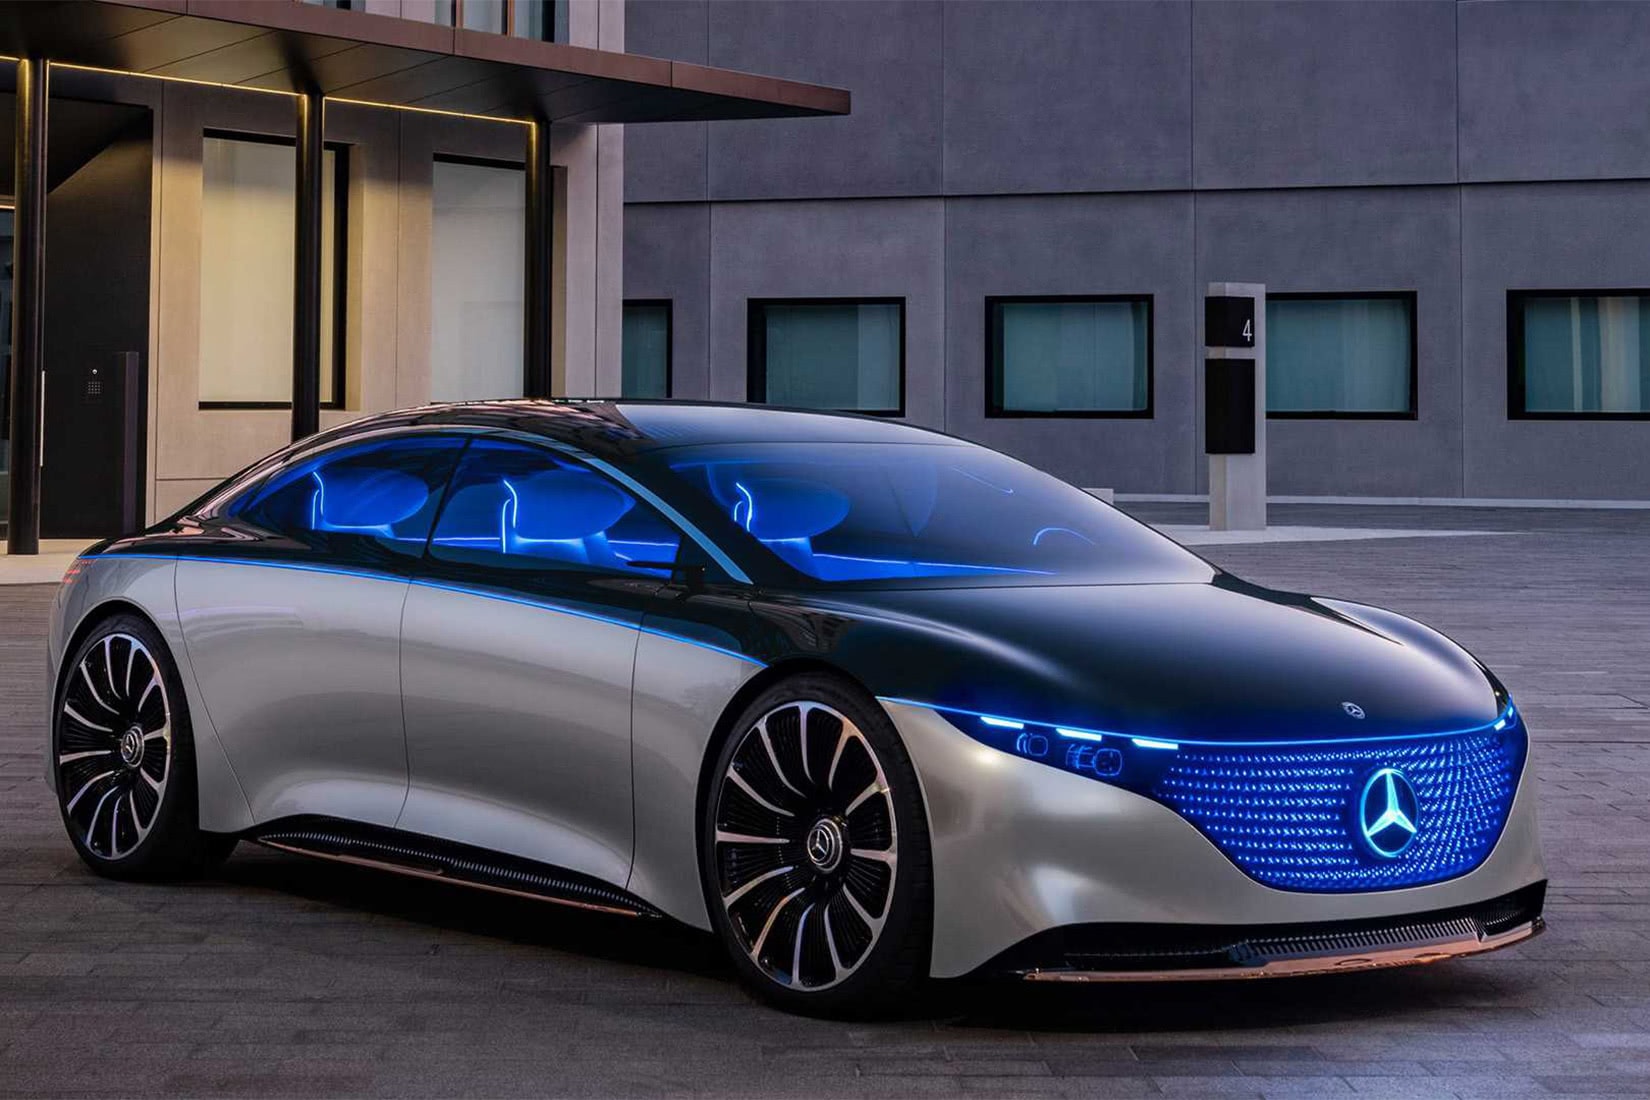 most luxury cars 2023 Flagship surfaced limitless - Luud Kiiw